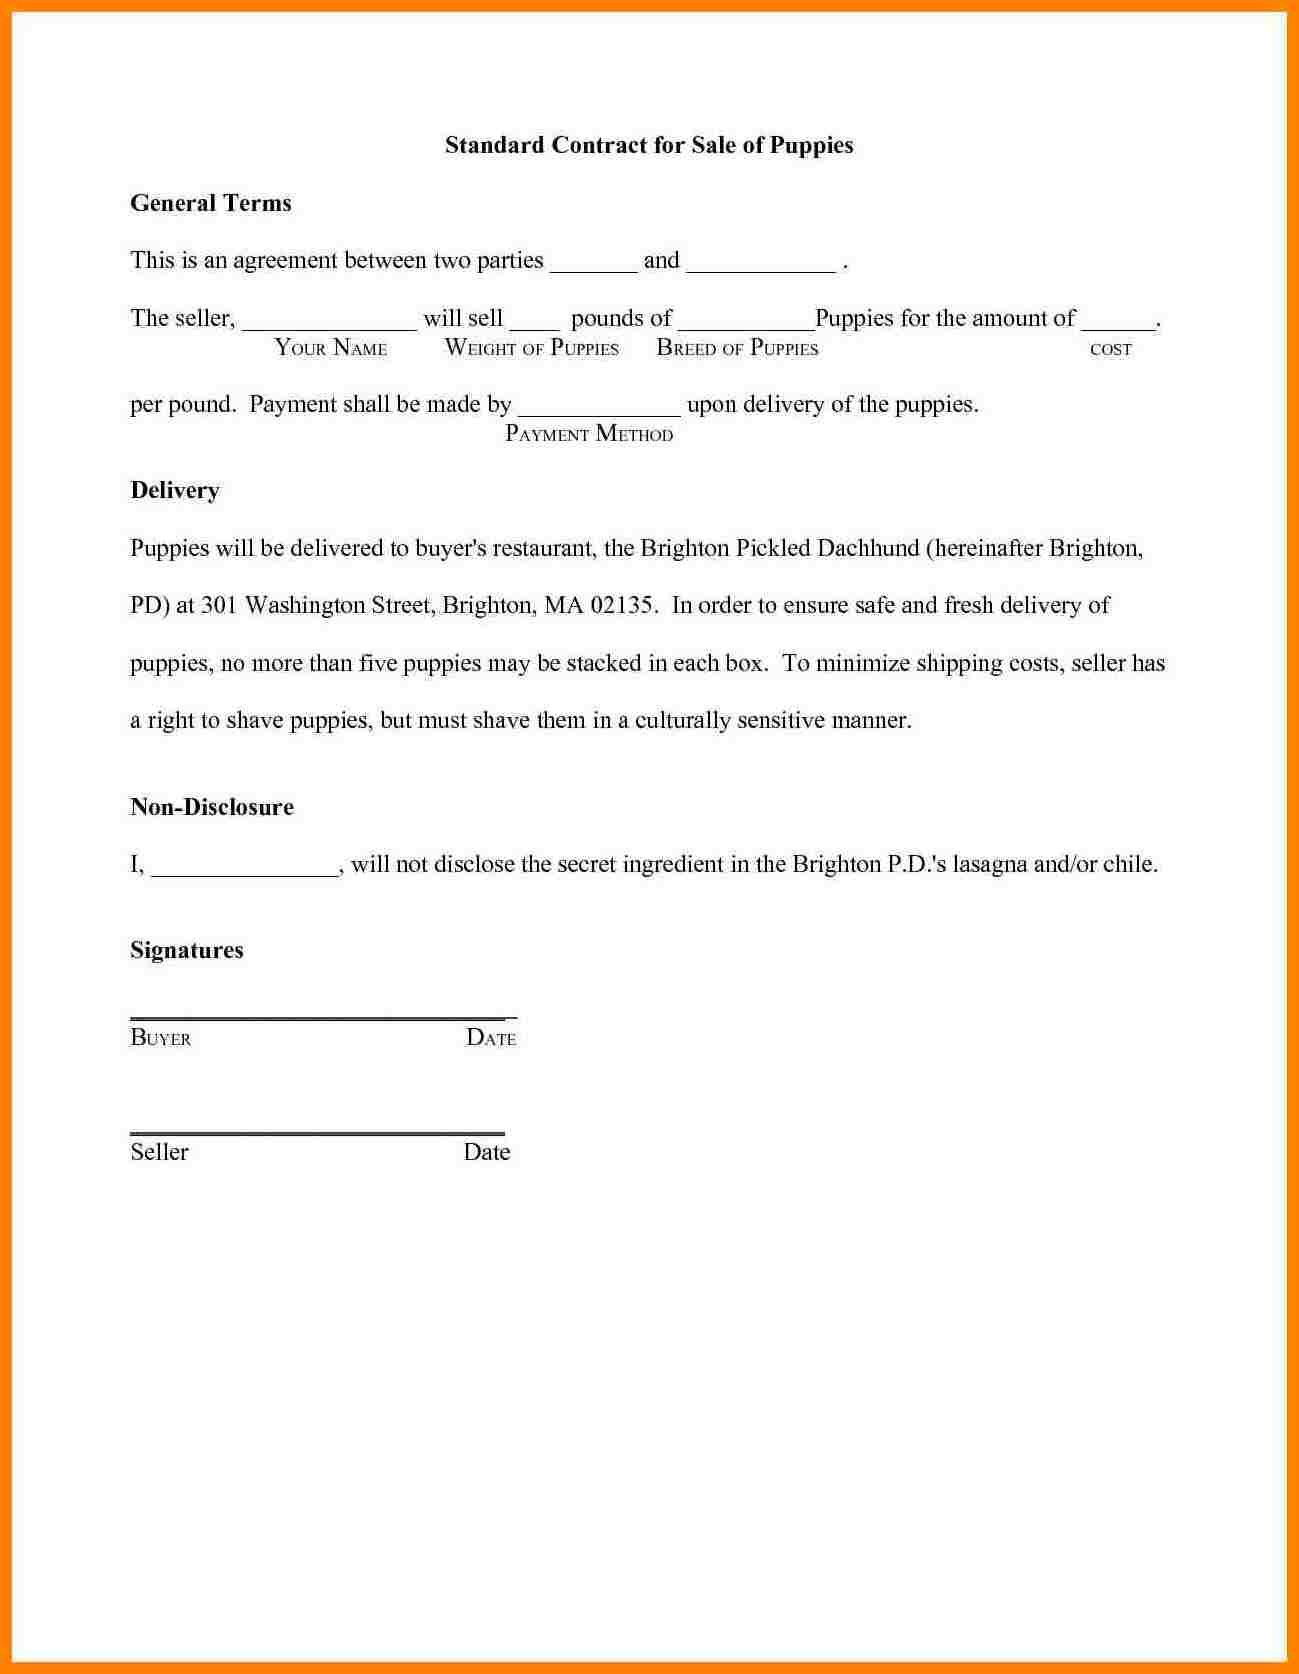 Contract Agreement Between Two Parties Gtld World Congress Document Simple